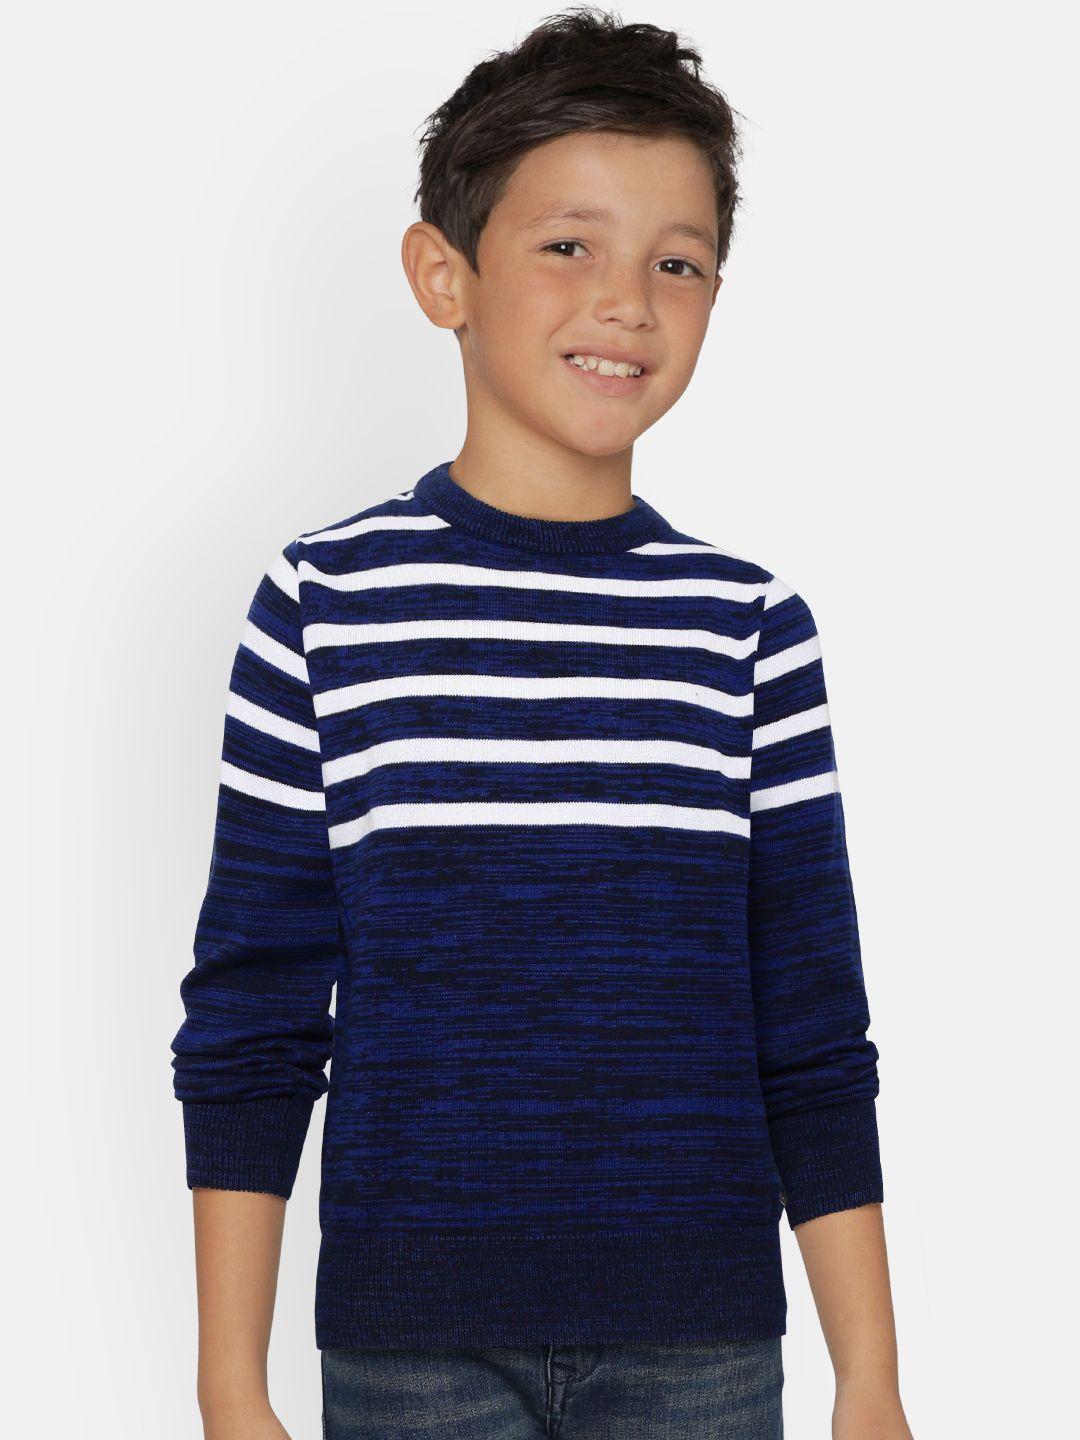 palm tree boys navy blue & white striped pullover sweater